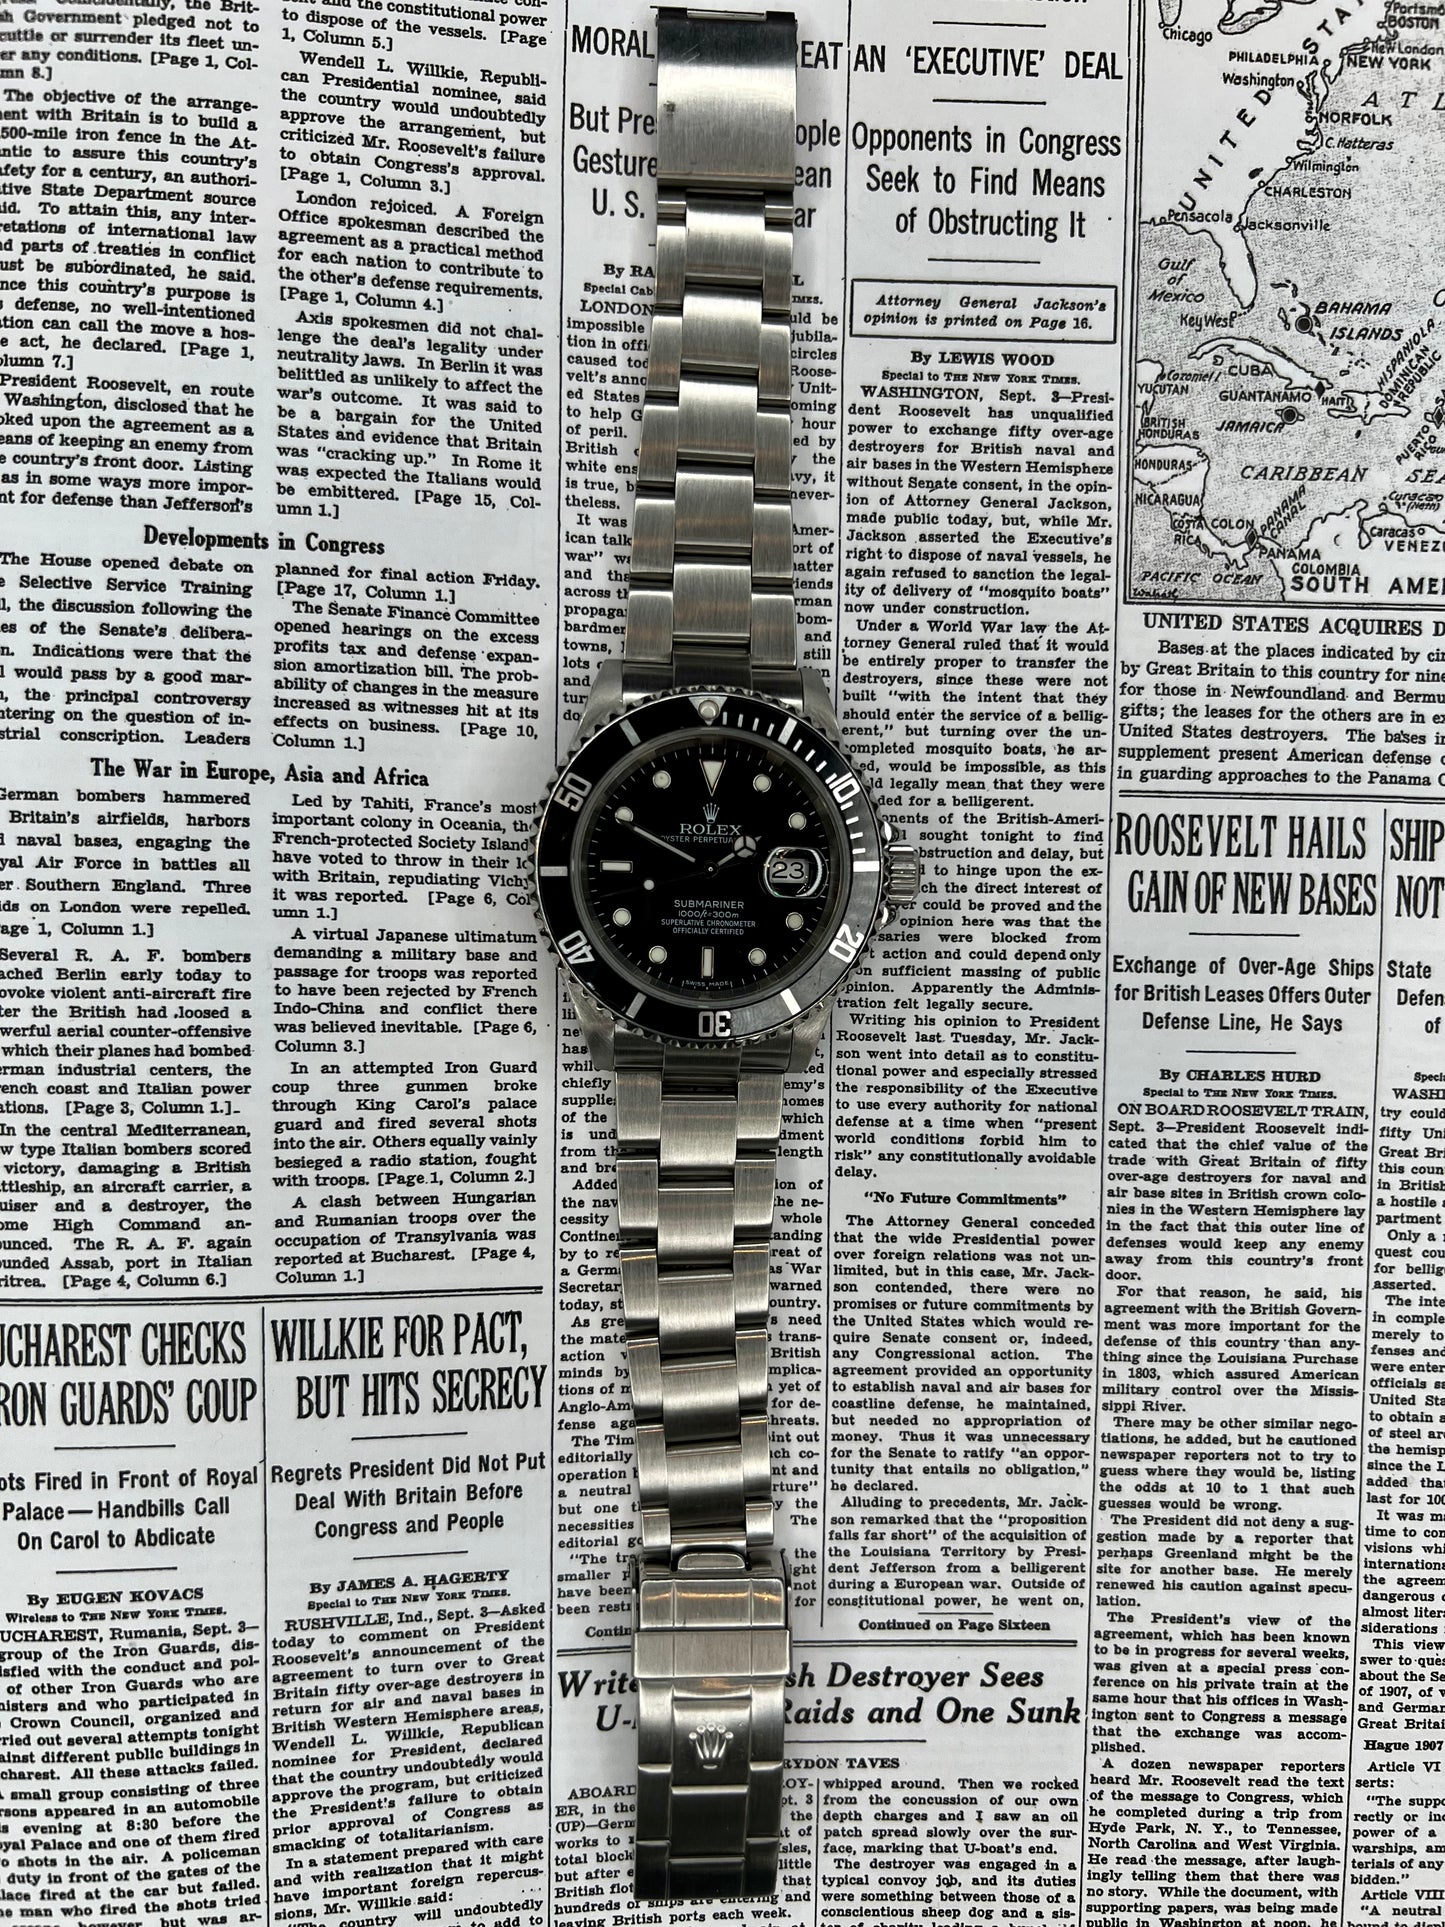 Rolex Submariner Reference 16610T 2006 Manufacture